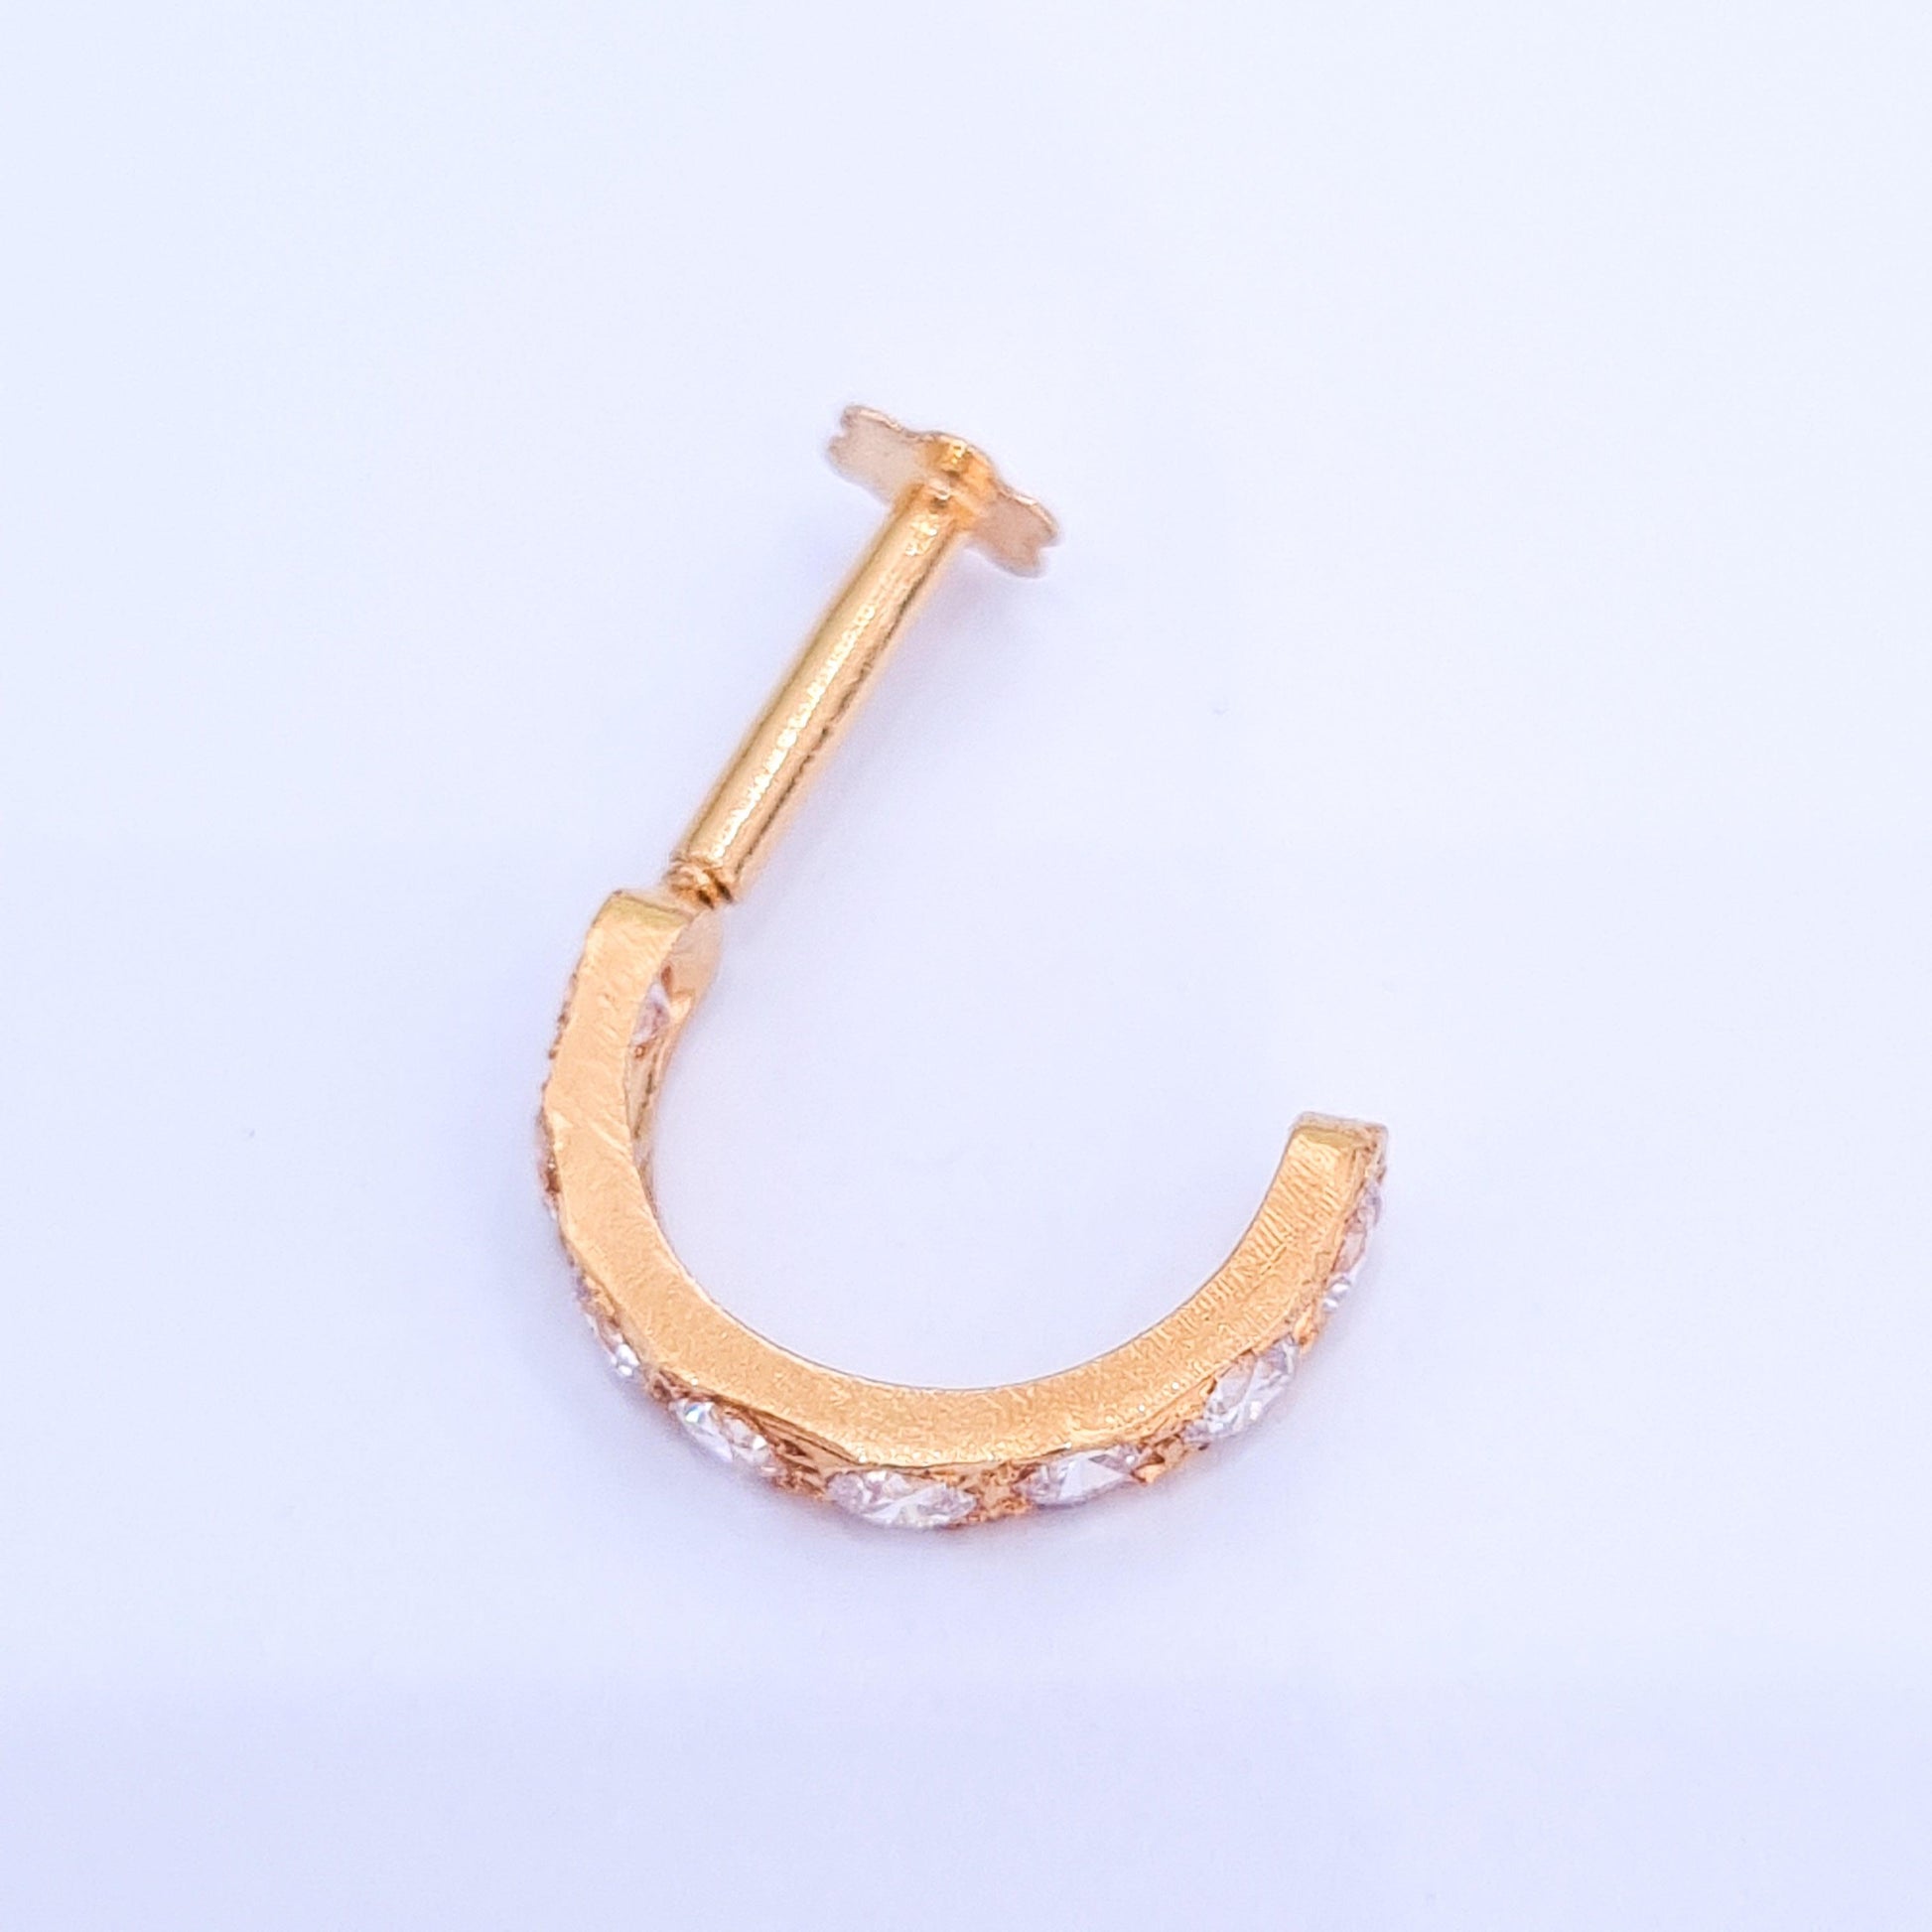 18ct Yellow Gold Faux Nose Ring with Screw Back Nose Stud with 8 Cubic Zirconias NS-2420 - Minar Jewellers